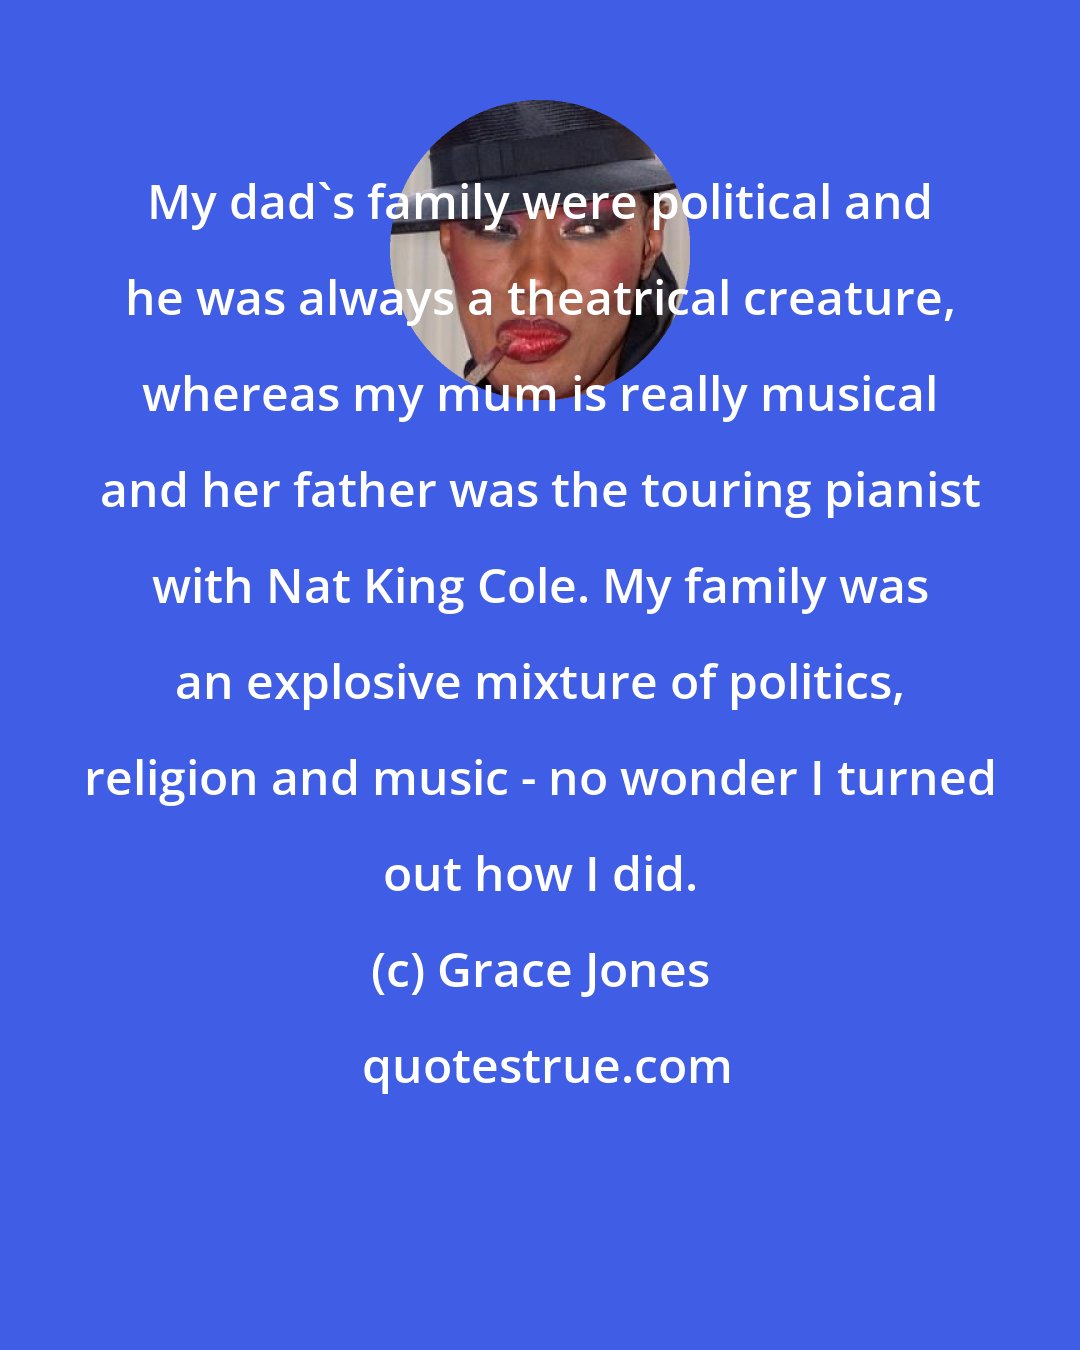 Grace Jones: My dad's family were political and he was always a theatrical creature, whereas my mum is really musical and her father was the touring pianist with Nat King Cole. My family was an explosive mixture of politics, religion and music - no wonder I turned out how I did.